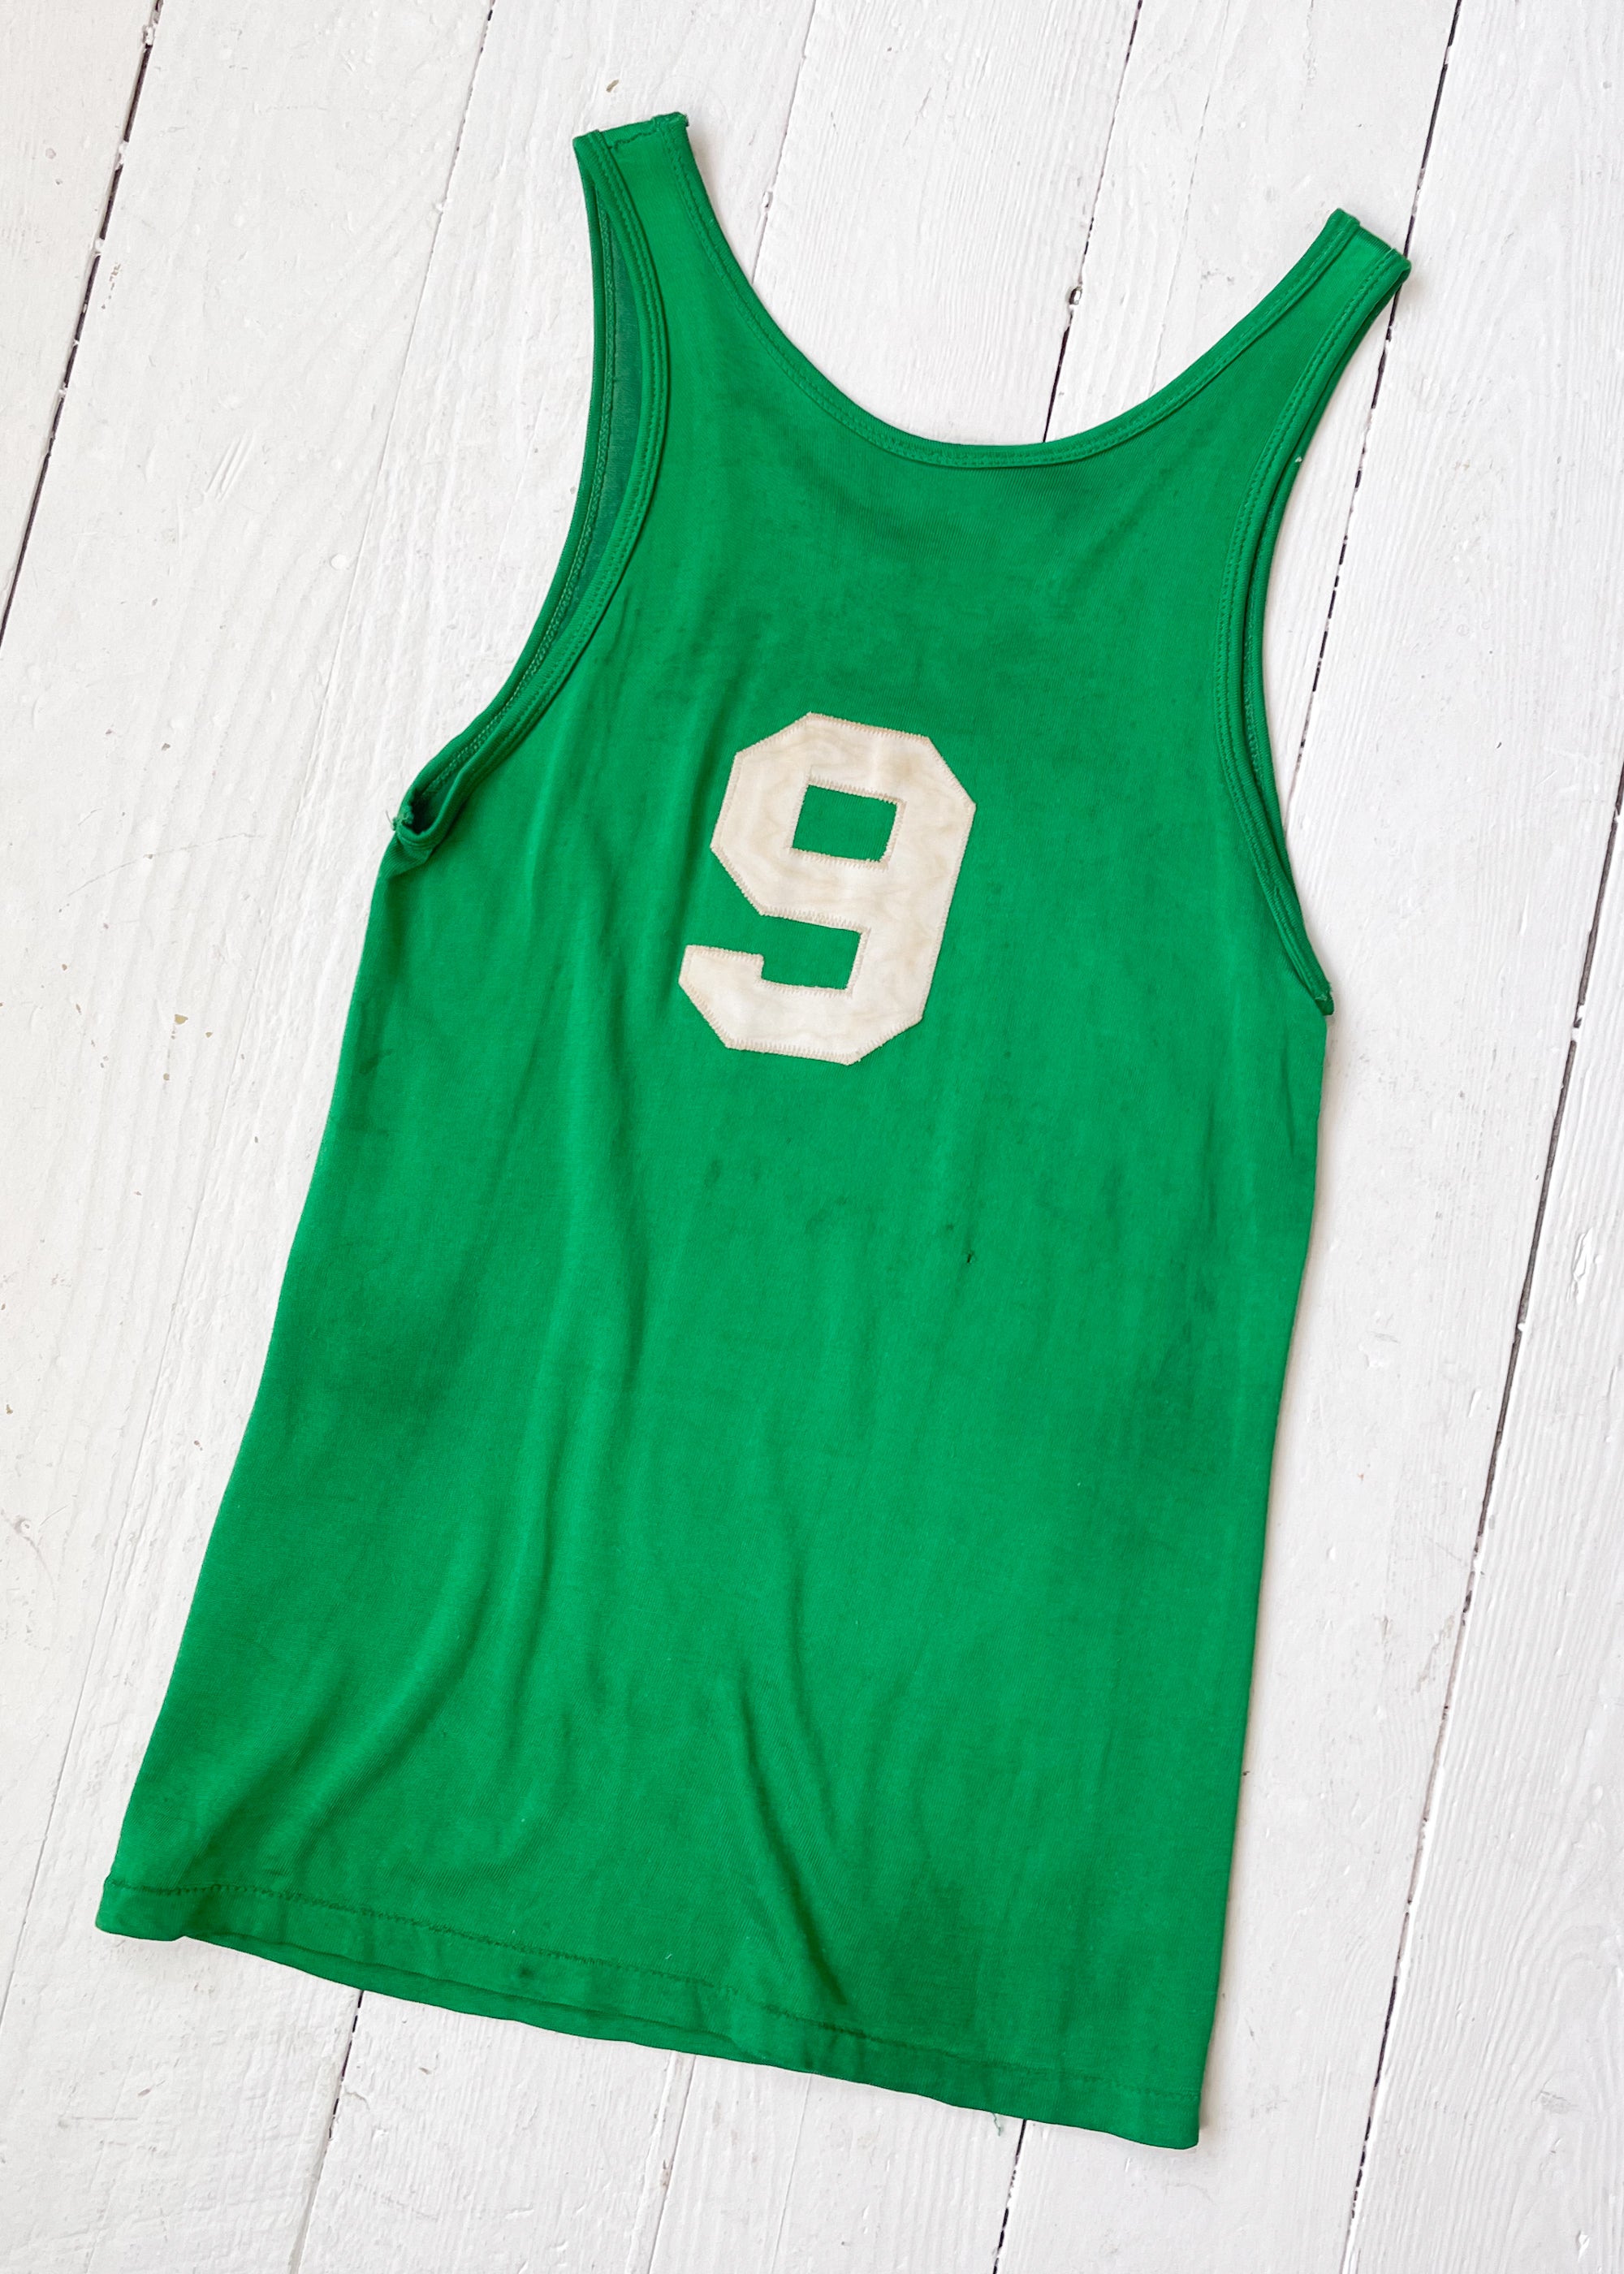 Vintage 1950's Basketball Jersey Men's Sz 42 Stitched USA # 45 A.F. of L.  green